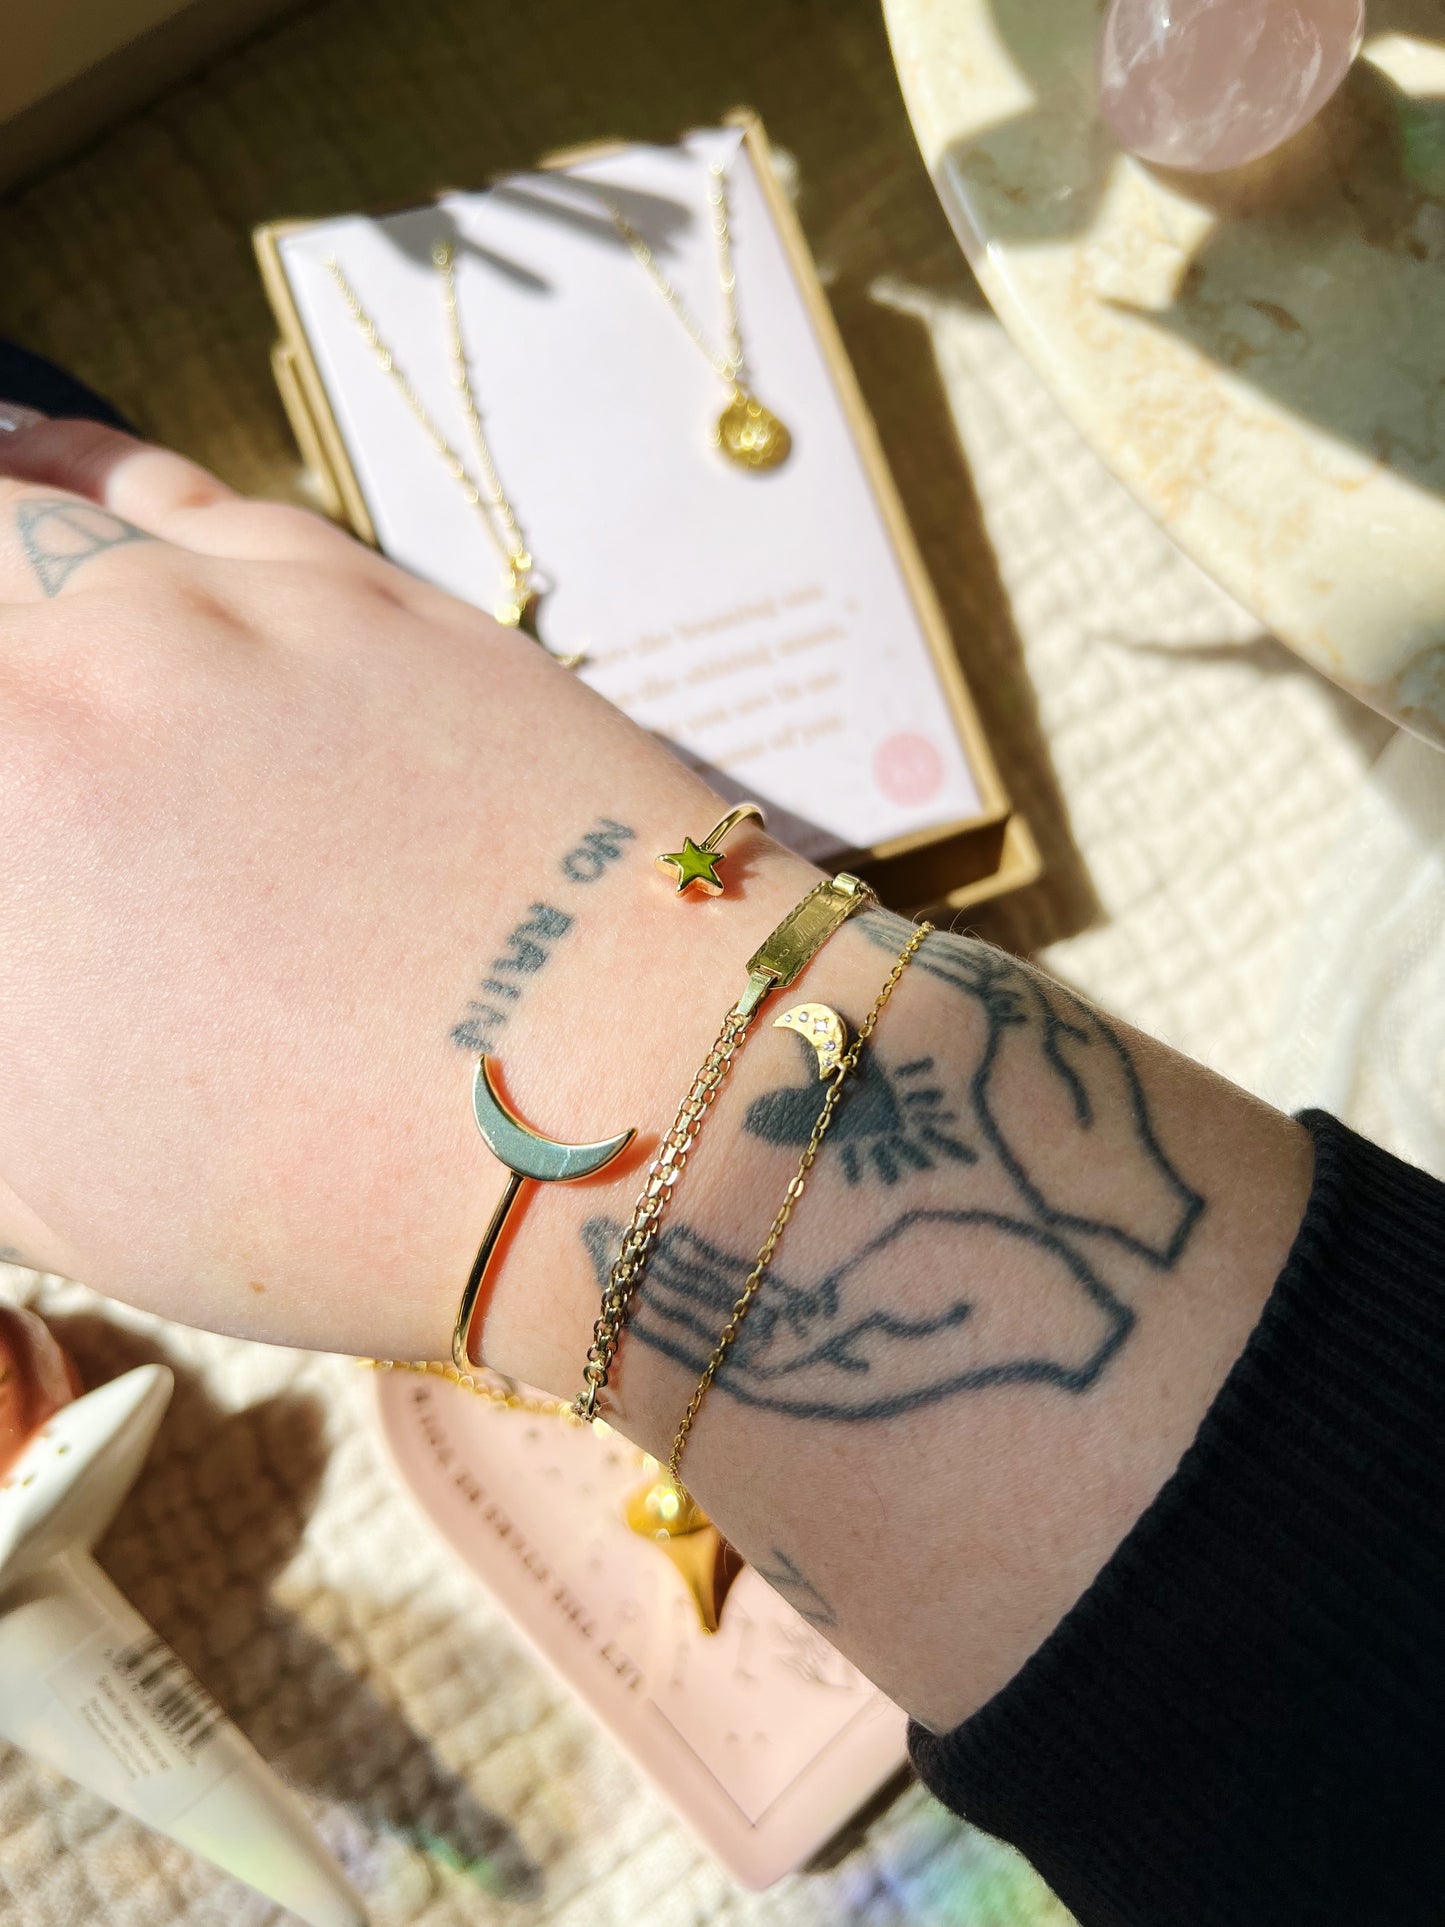 Gold Moon and Star Armbånd